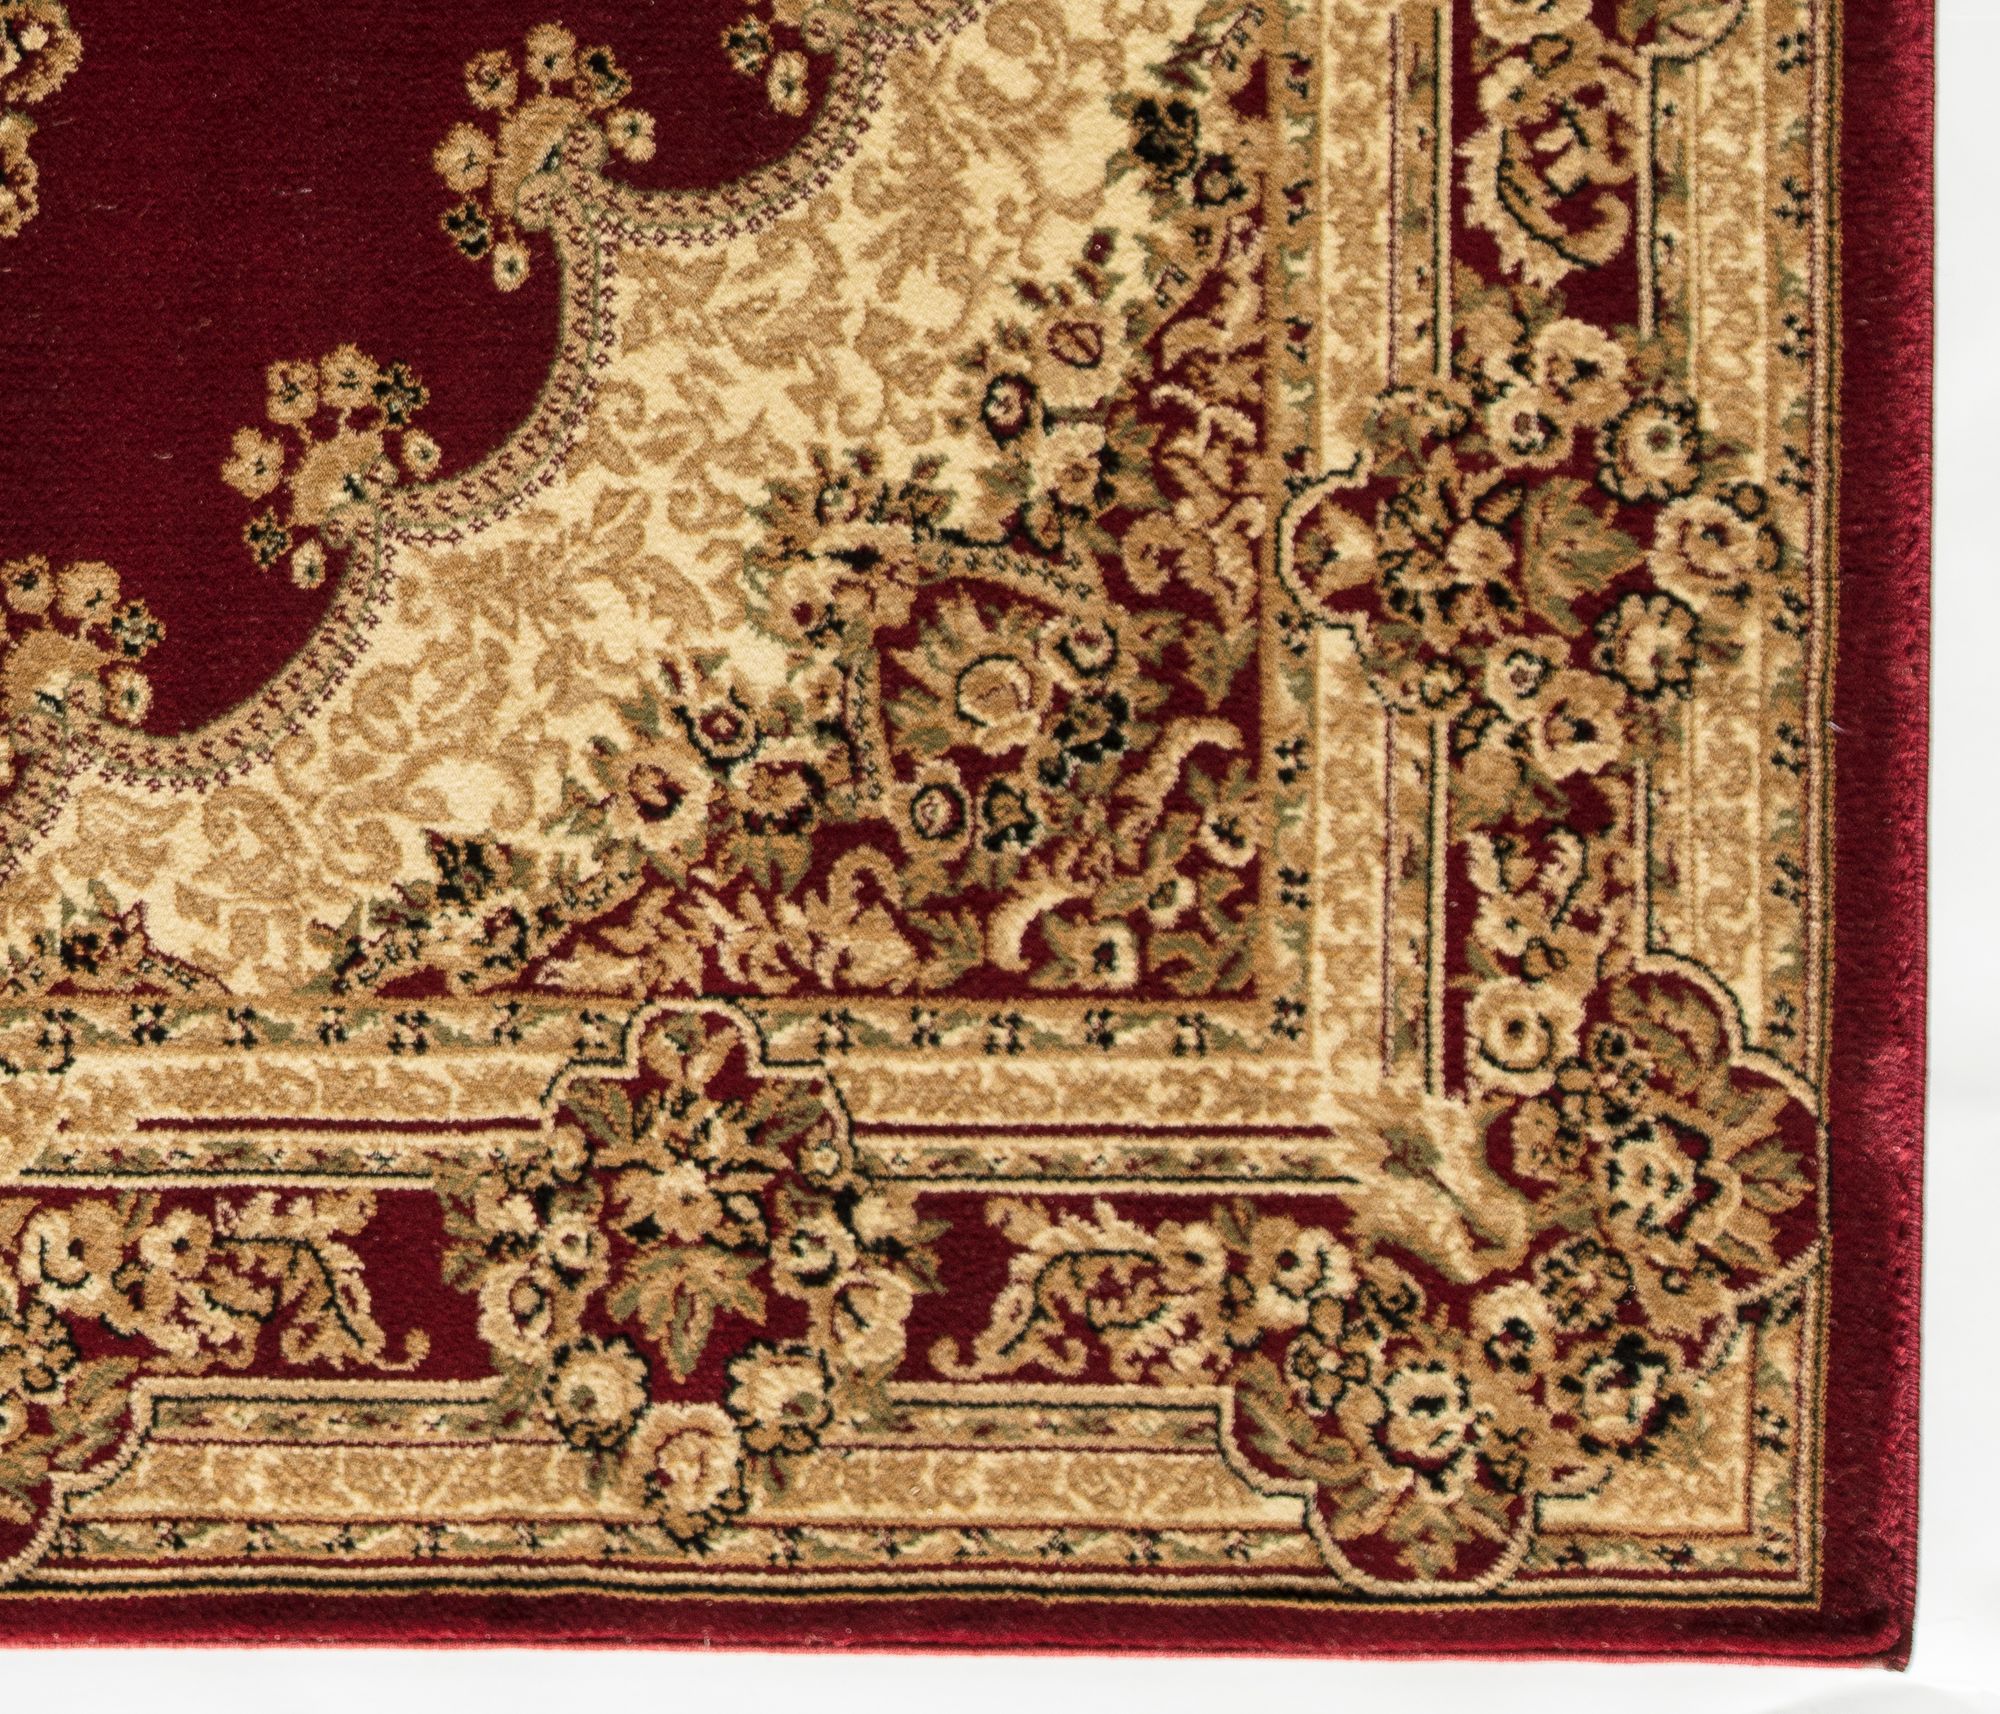 Rugs America Vista 807-RED Kerman Red Oriental Traditional Red Area Rug, 5'3"Round - image 3 of 3